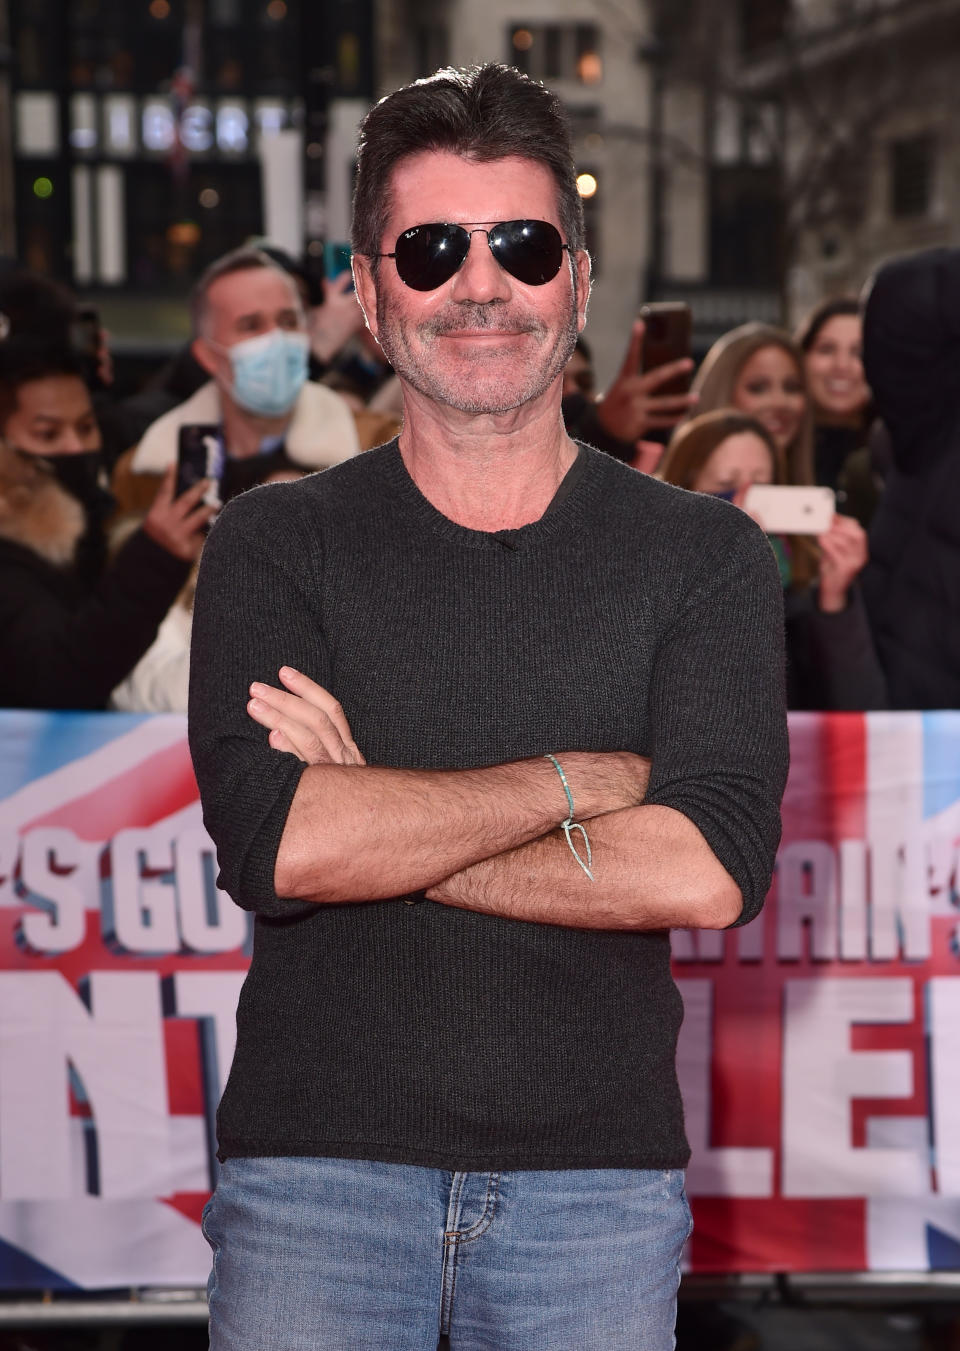 LONDON, ENGLAND - JANUARY 18: Judge Simon Cowell attends the Britain's Got Talent Auditions at the London Palladium on January 18, 2022 in London, England. (Photo by Eamonn M. McCormack/Getty Images)